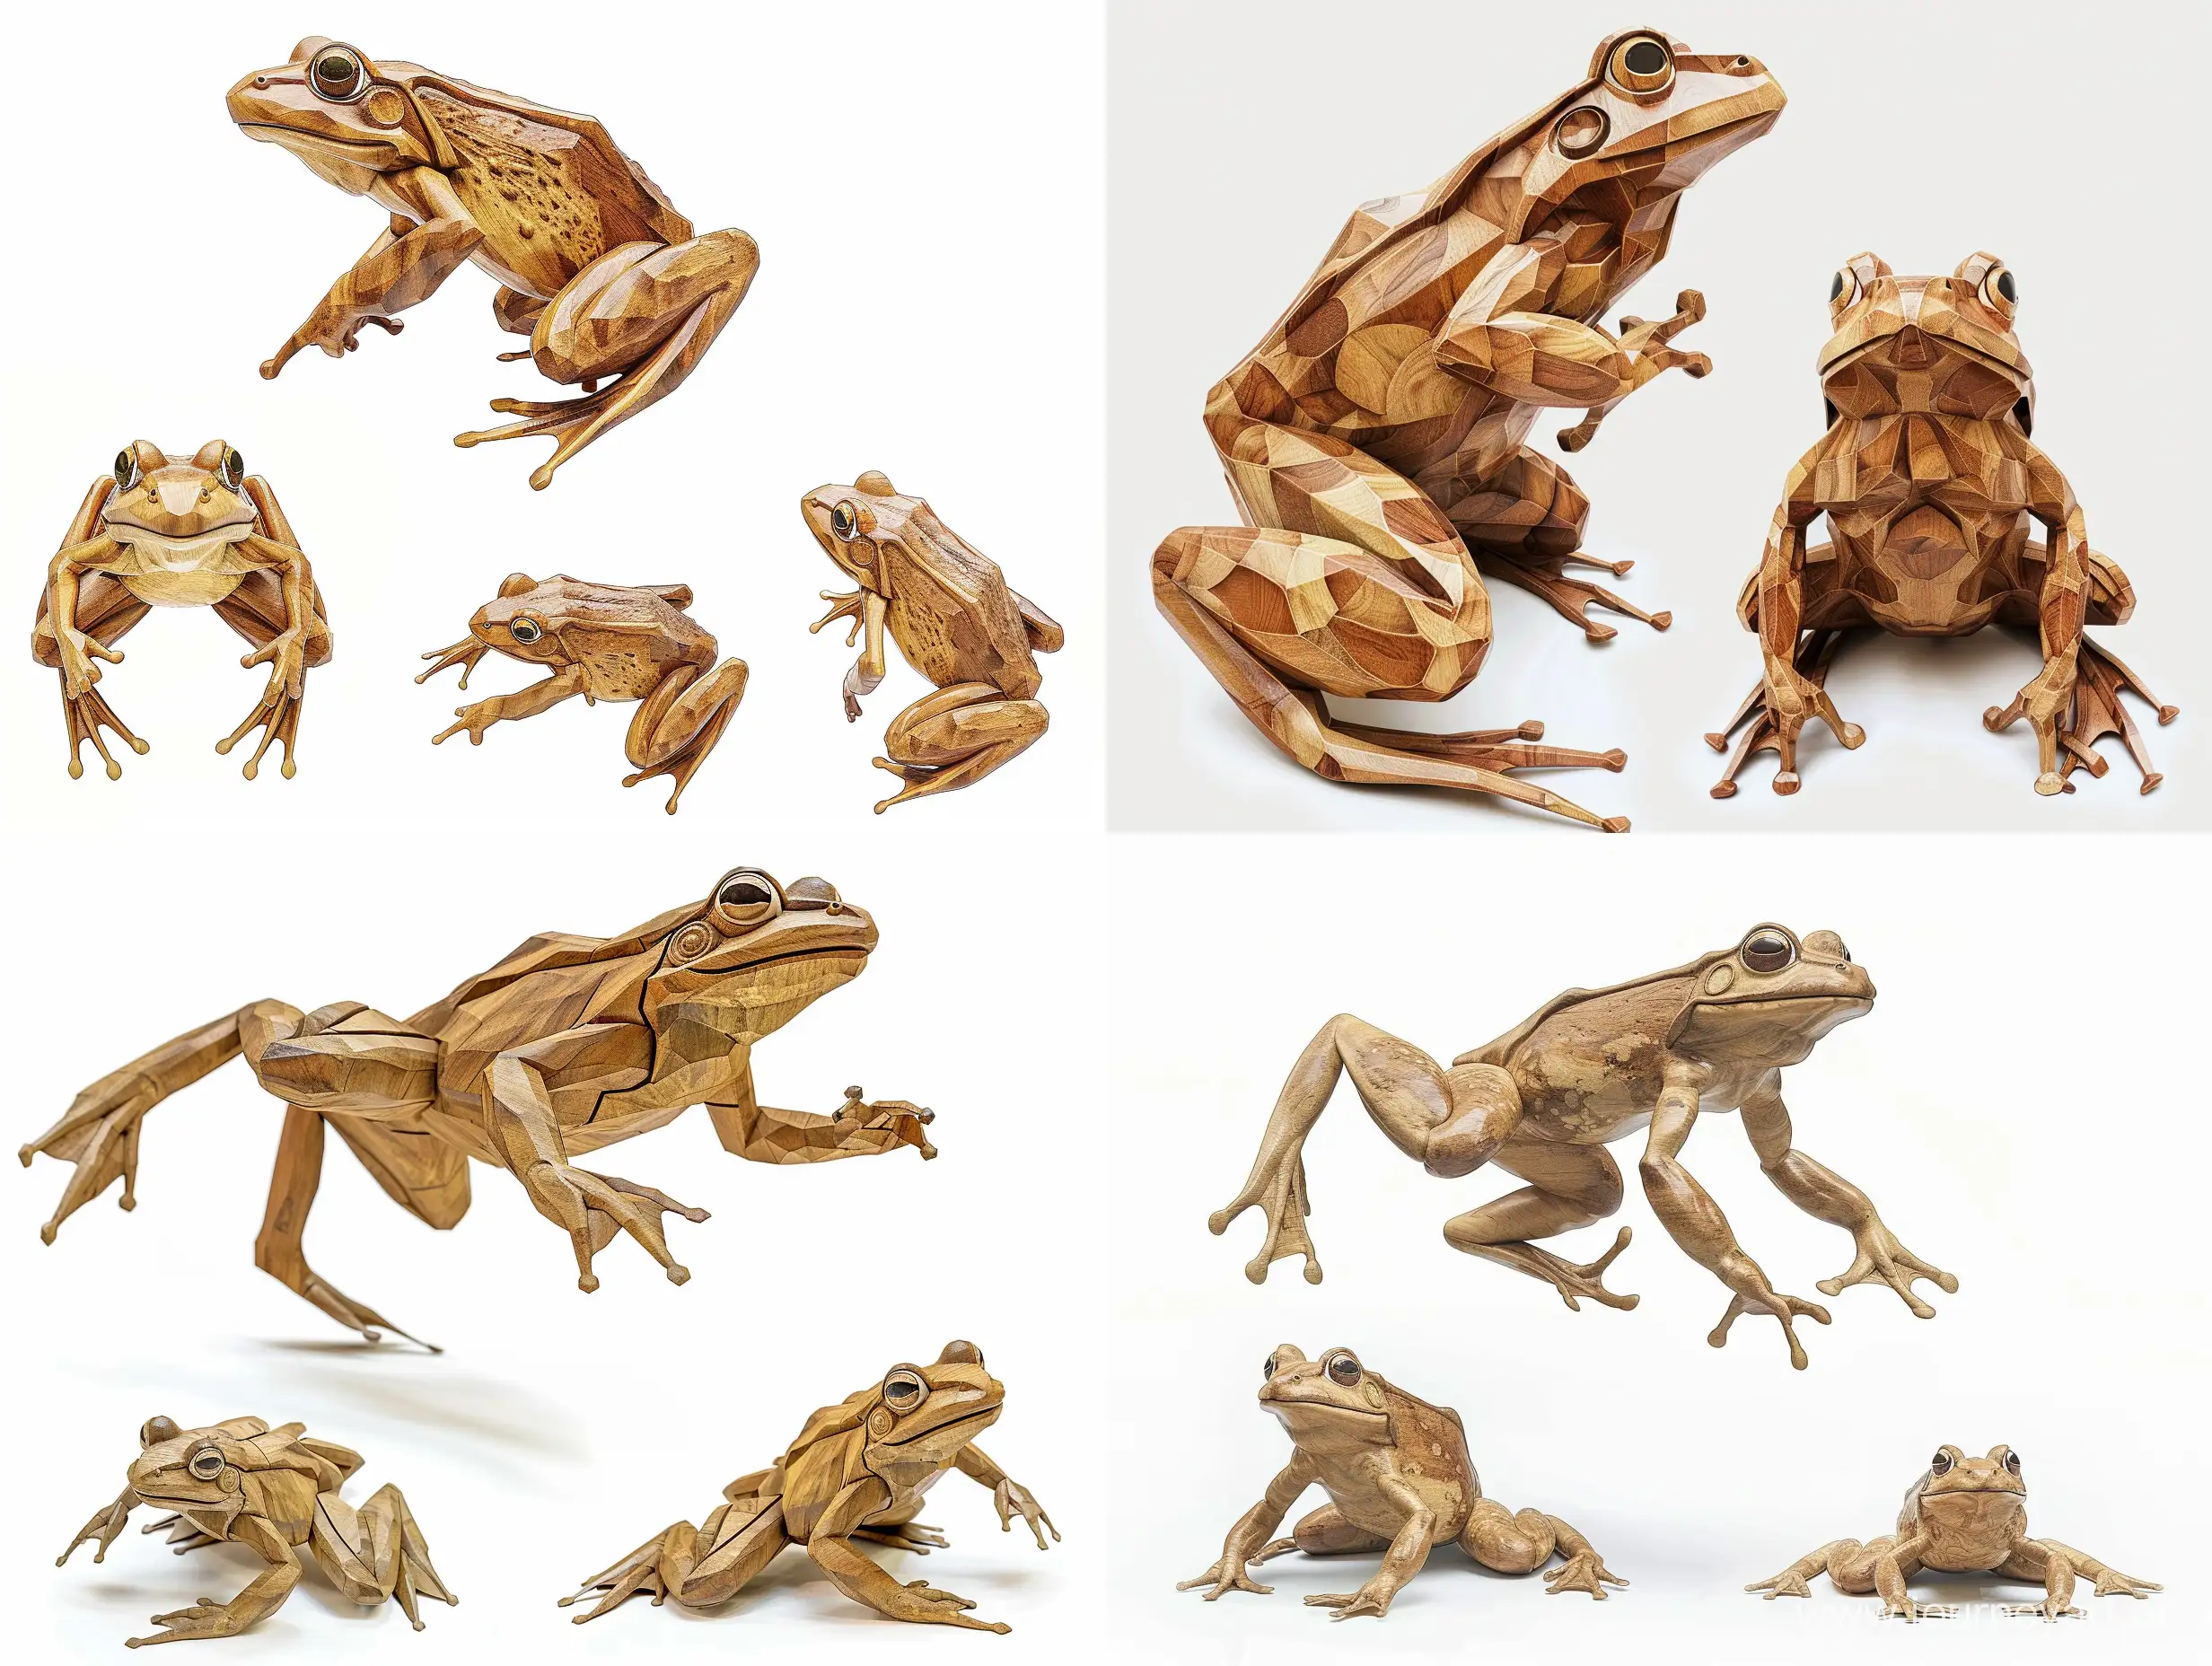 Dynamic-FullLength-Frog-Wooden-Sculpture-Realistic-Wood-Carving